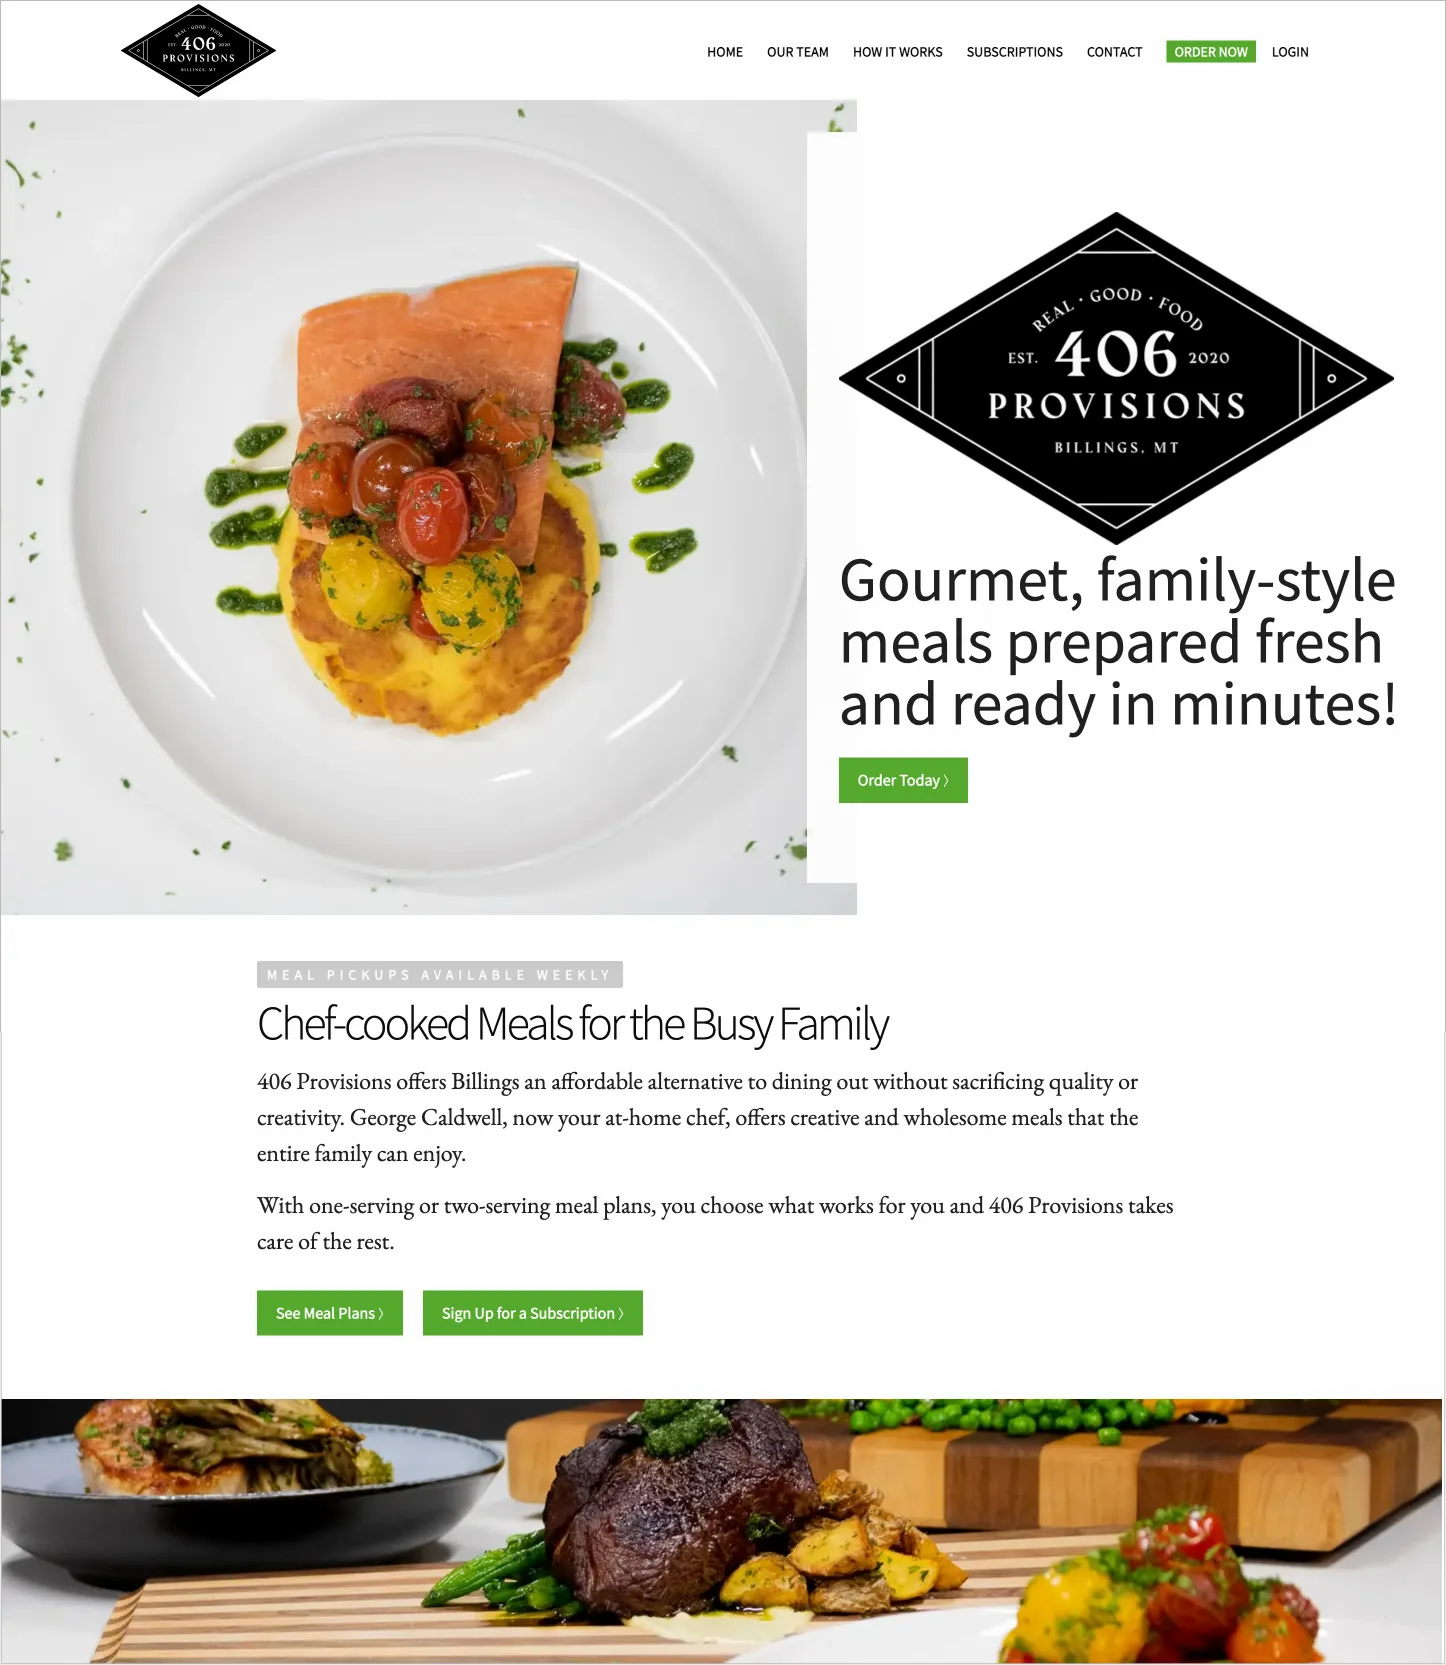 example of effective website featuring gourmet food service, 406 Provisions